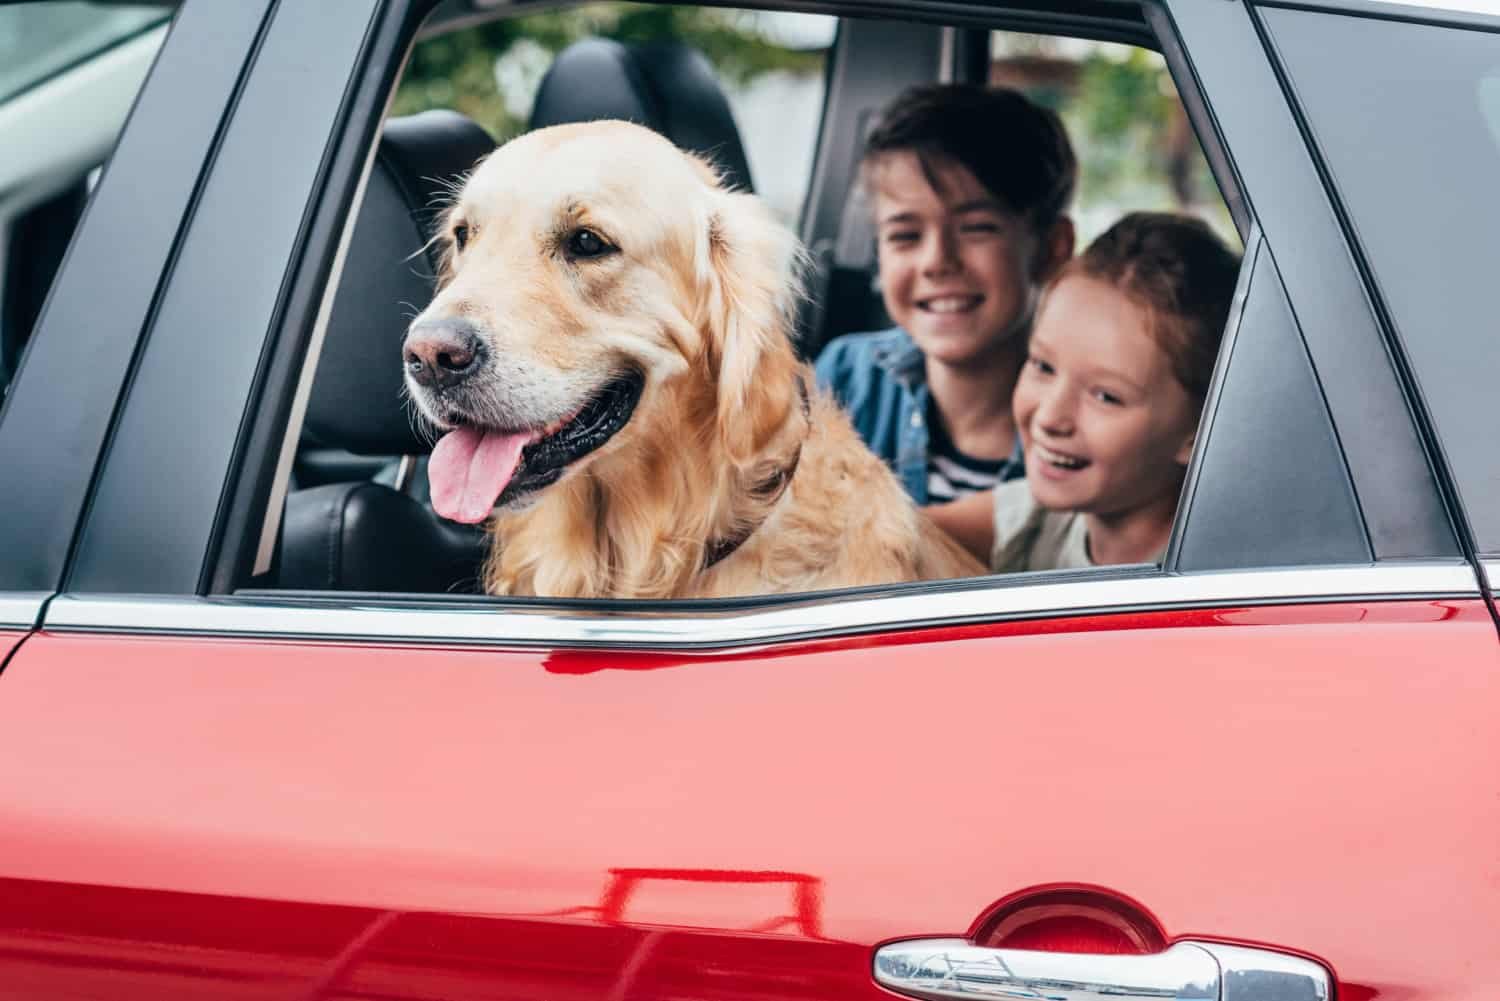 Dog and kids in car on pet friendly vacation to a theme park with kennels